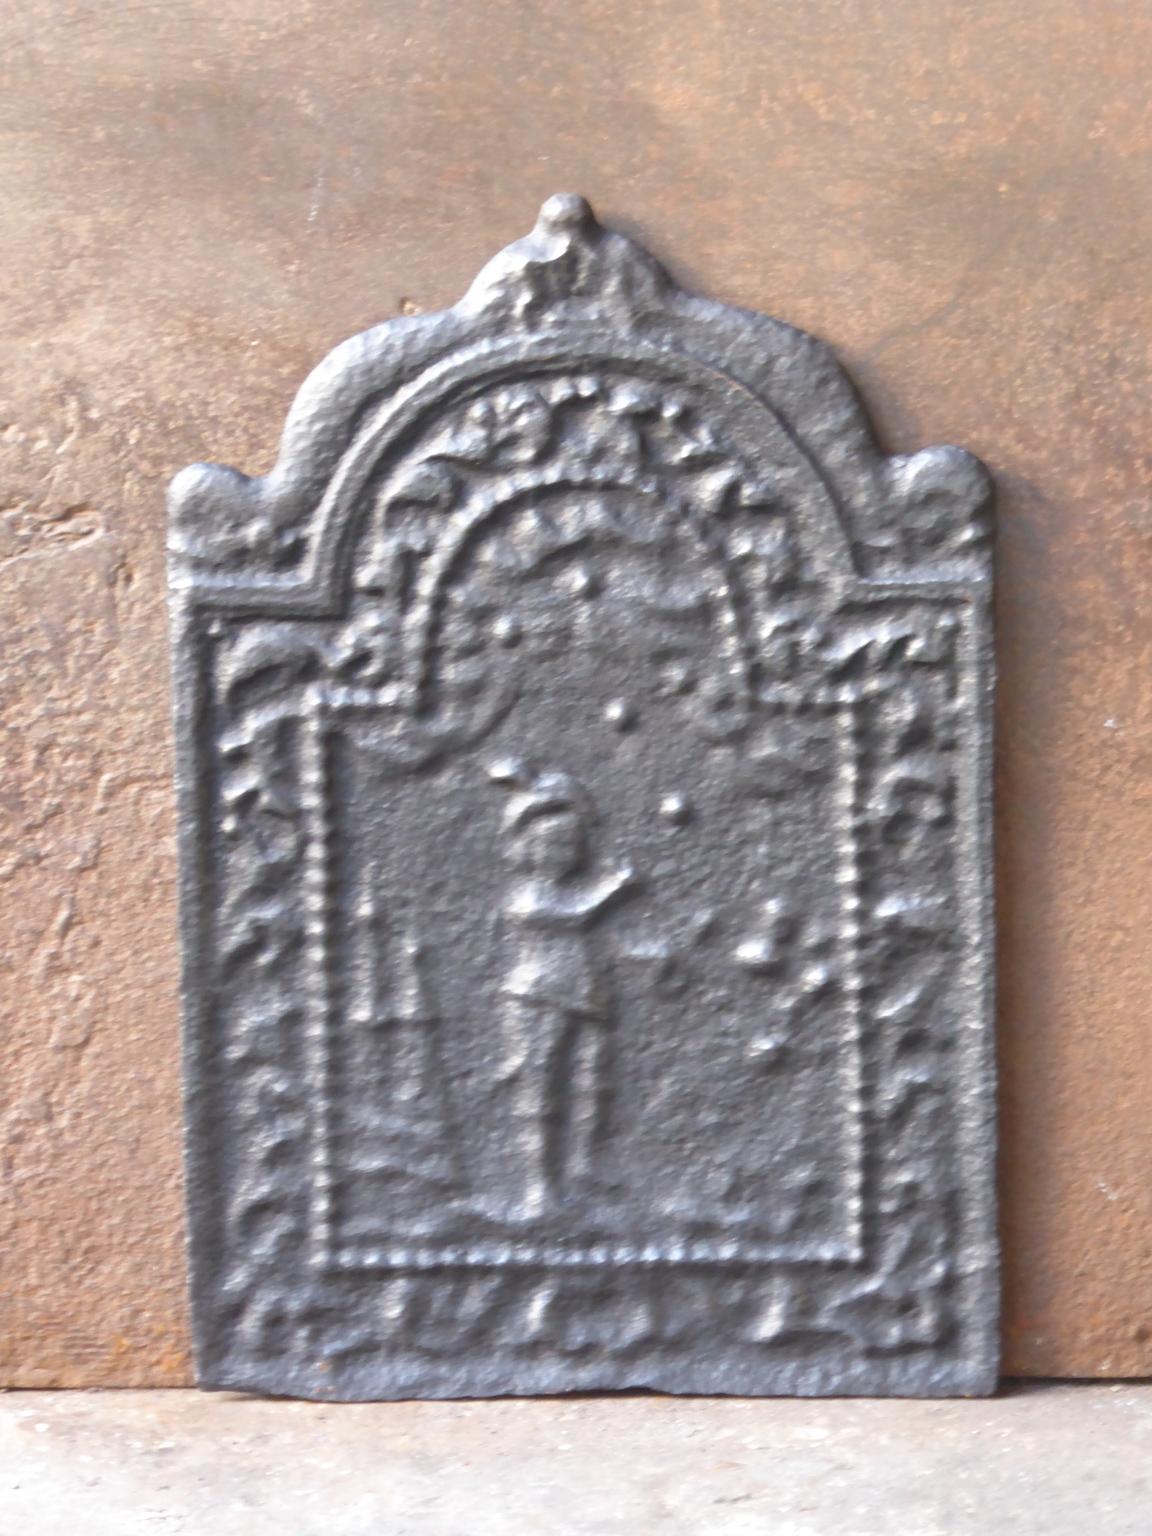 Dutch Louis XIV fireback. The fireback is from the 17th or early 18th century. It has a black / pewter patina. The condition is good, no cracks.


 